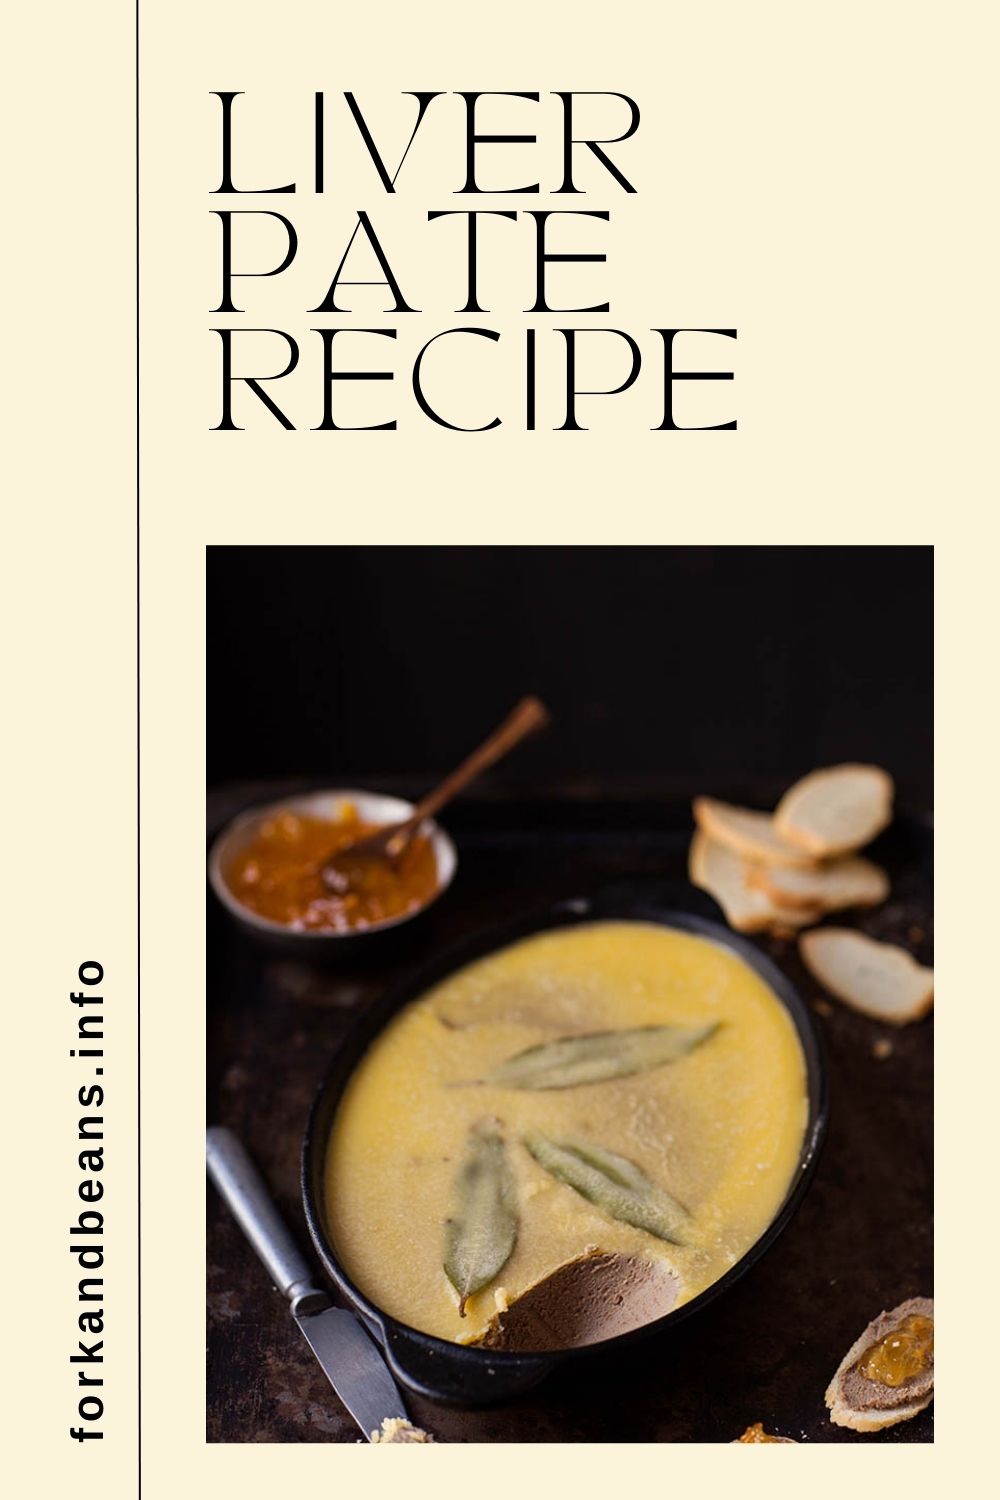 The ultimate recipe for chicken liver pate